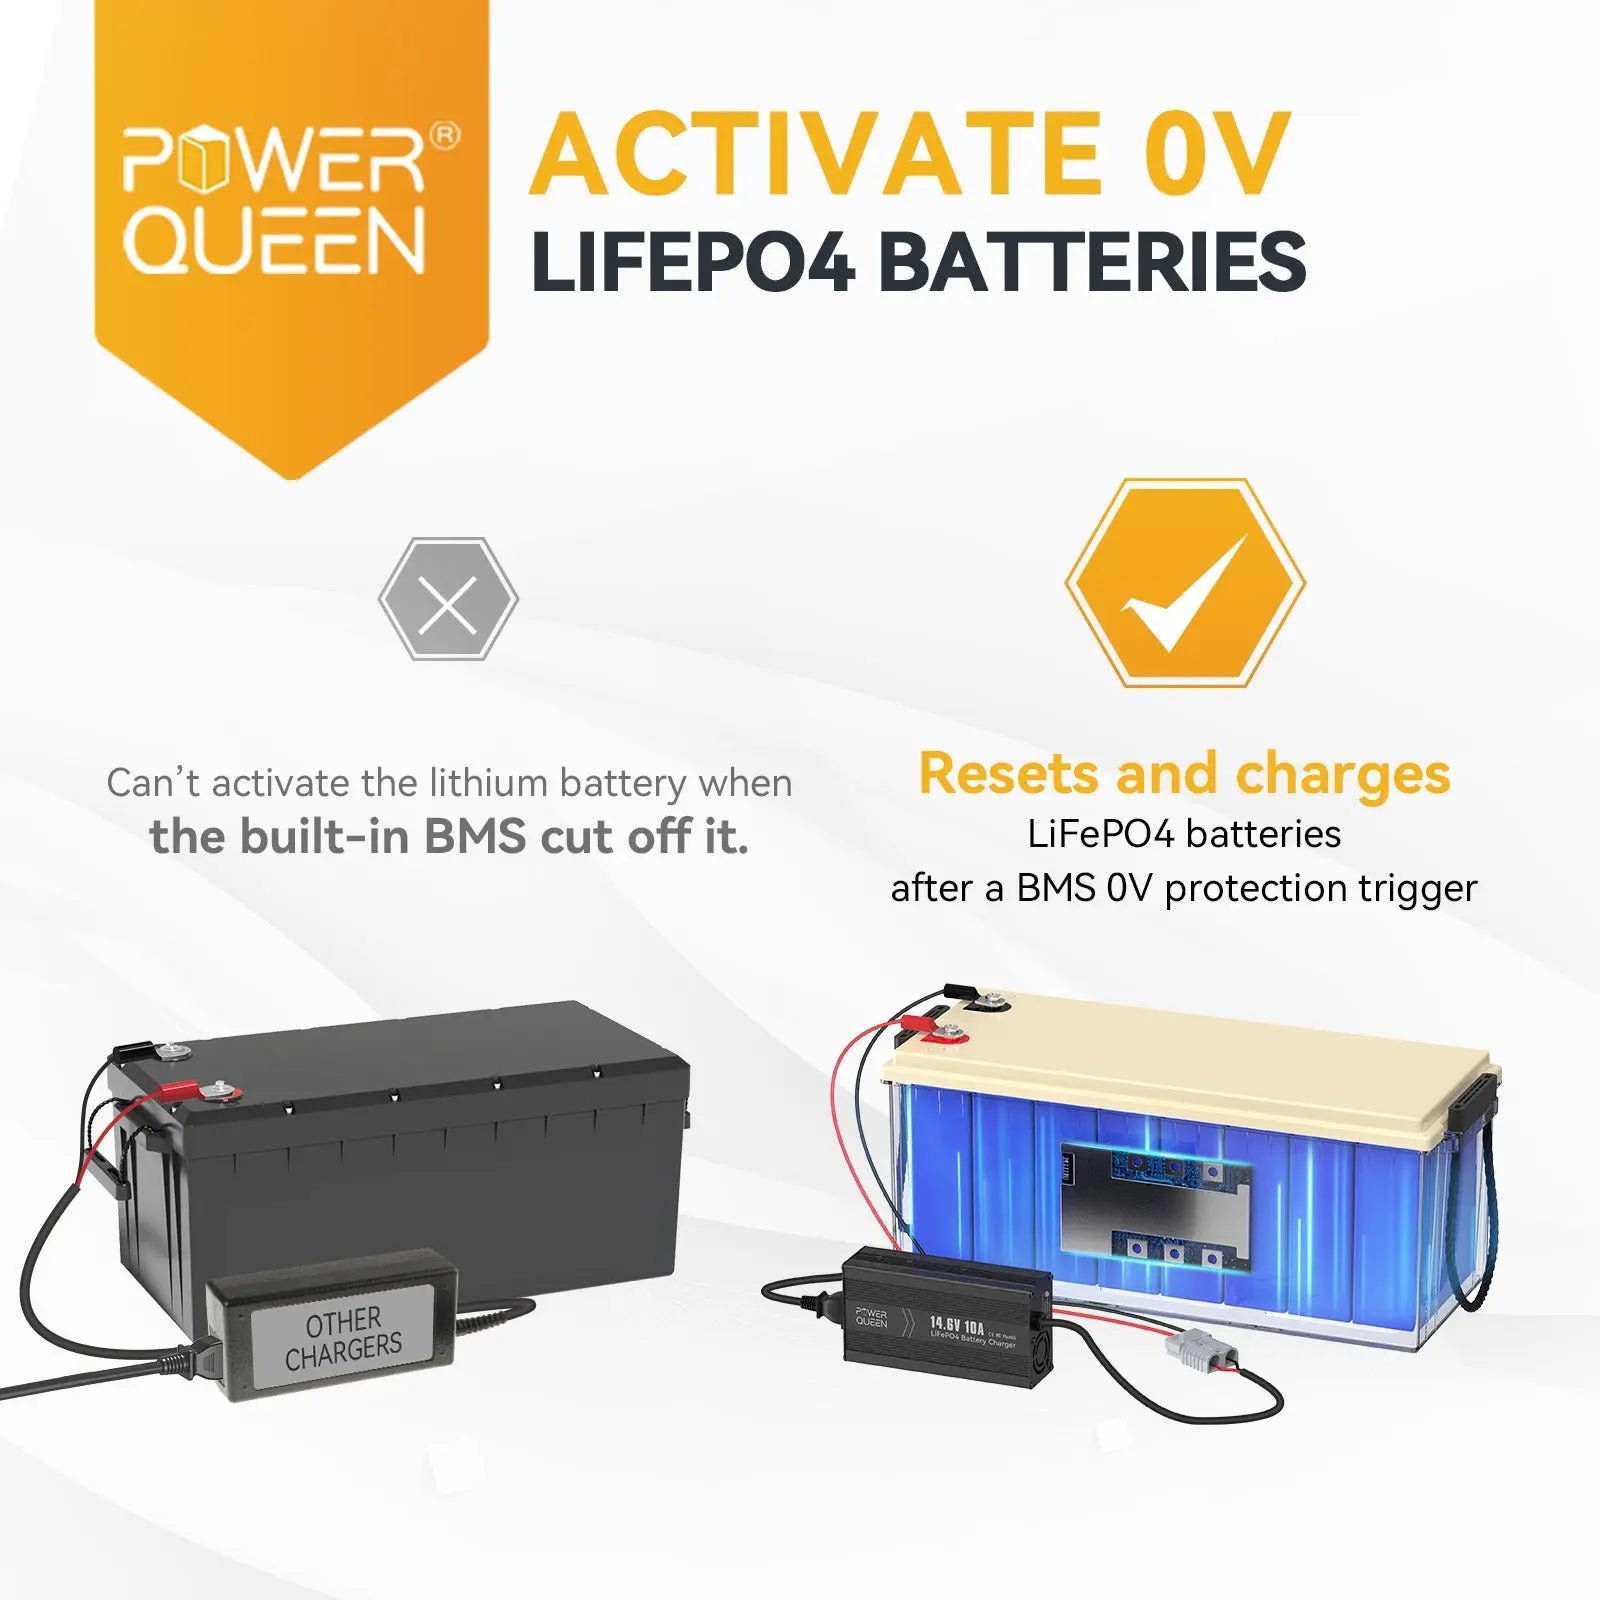 Power-Queen-14.6V-10A-lithium-ion-charger